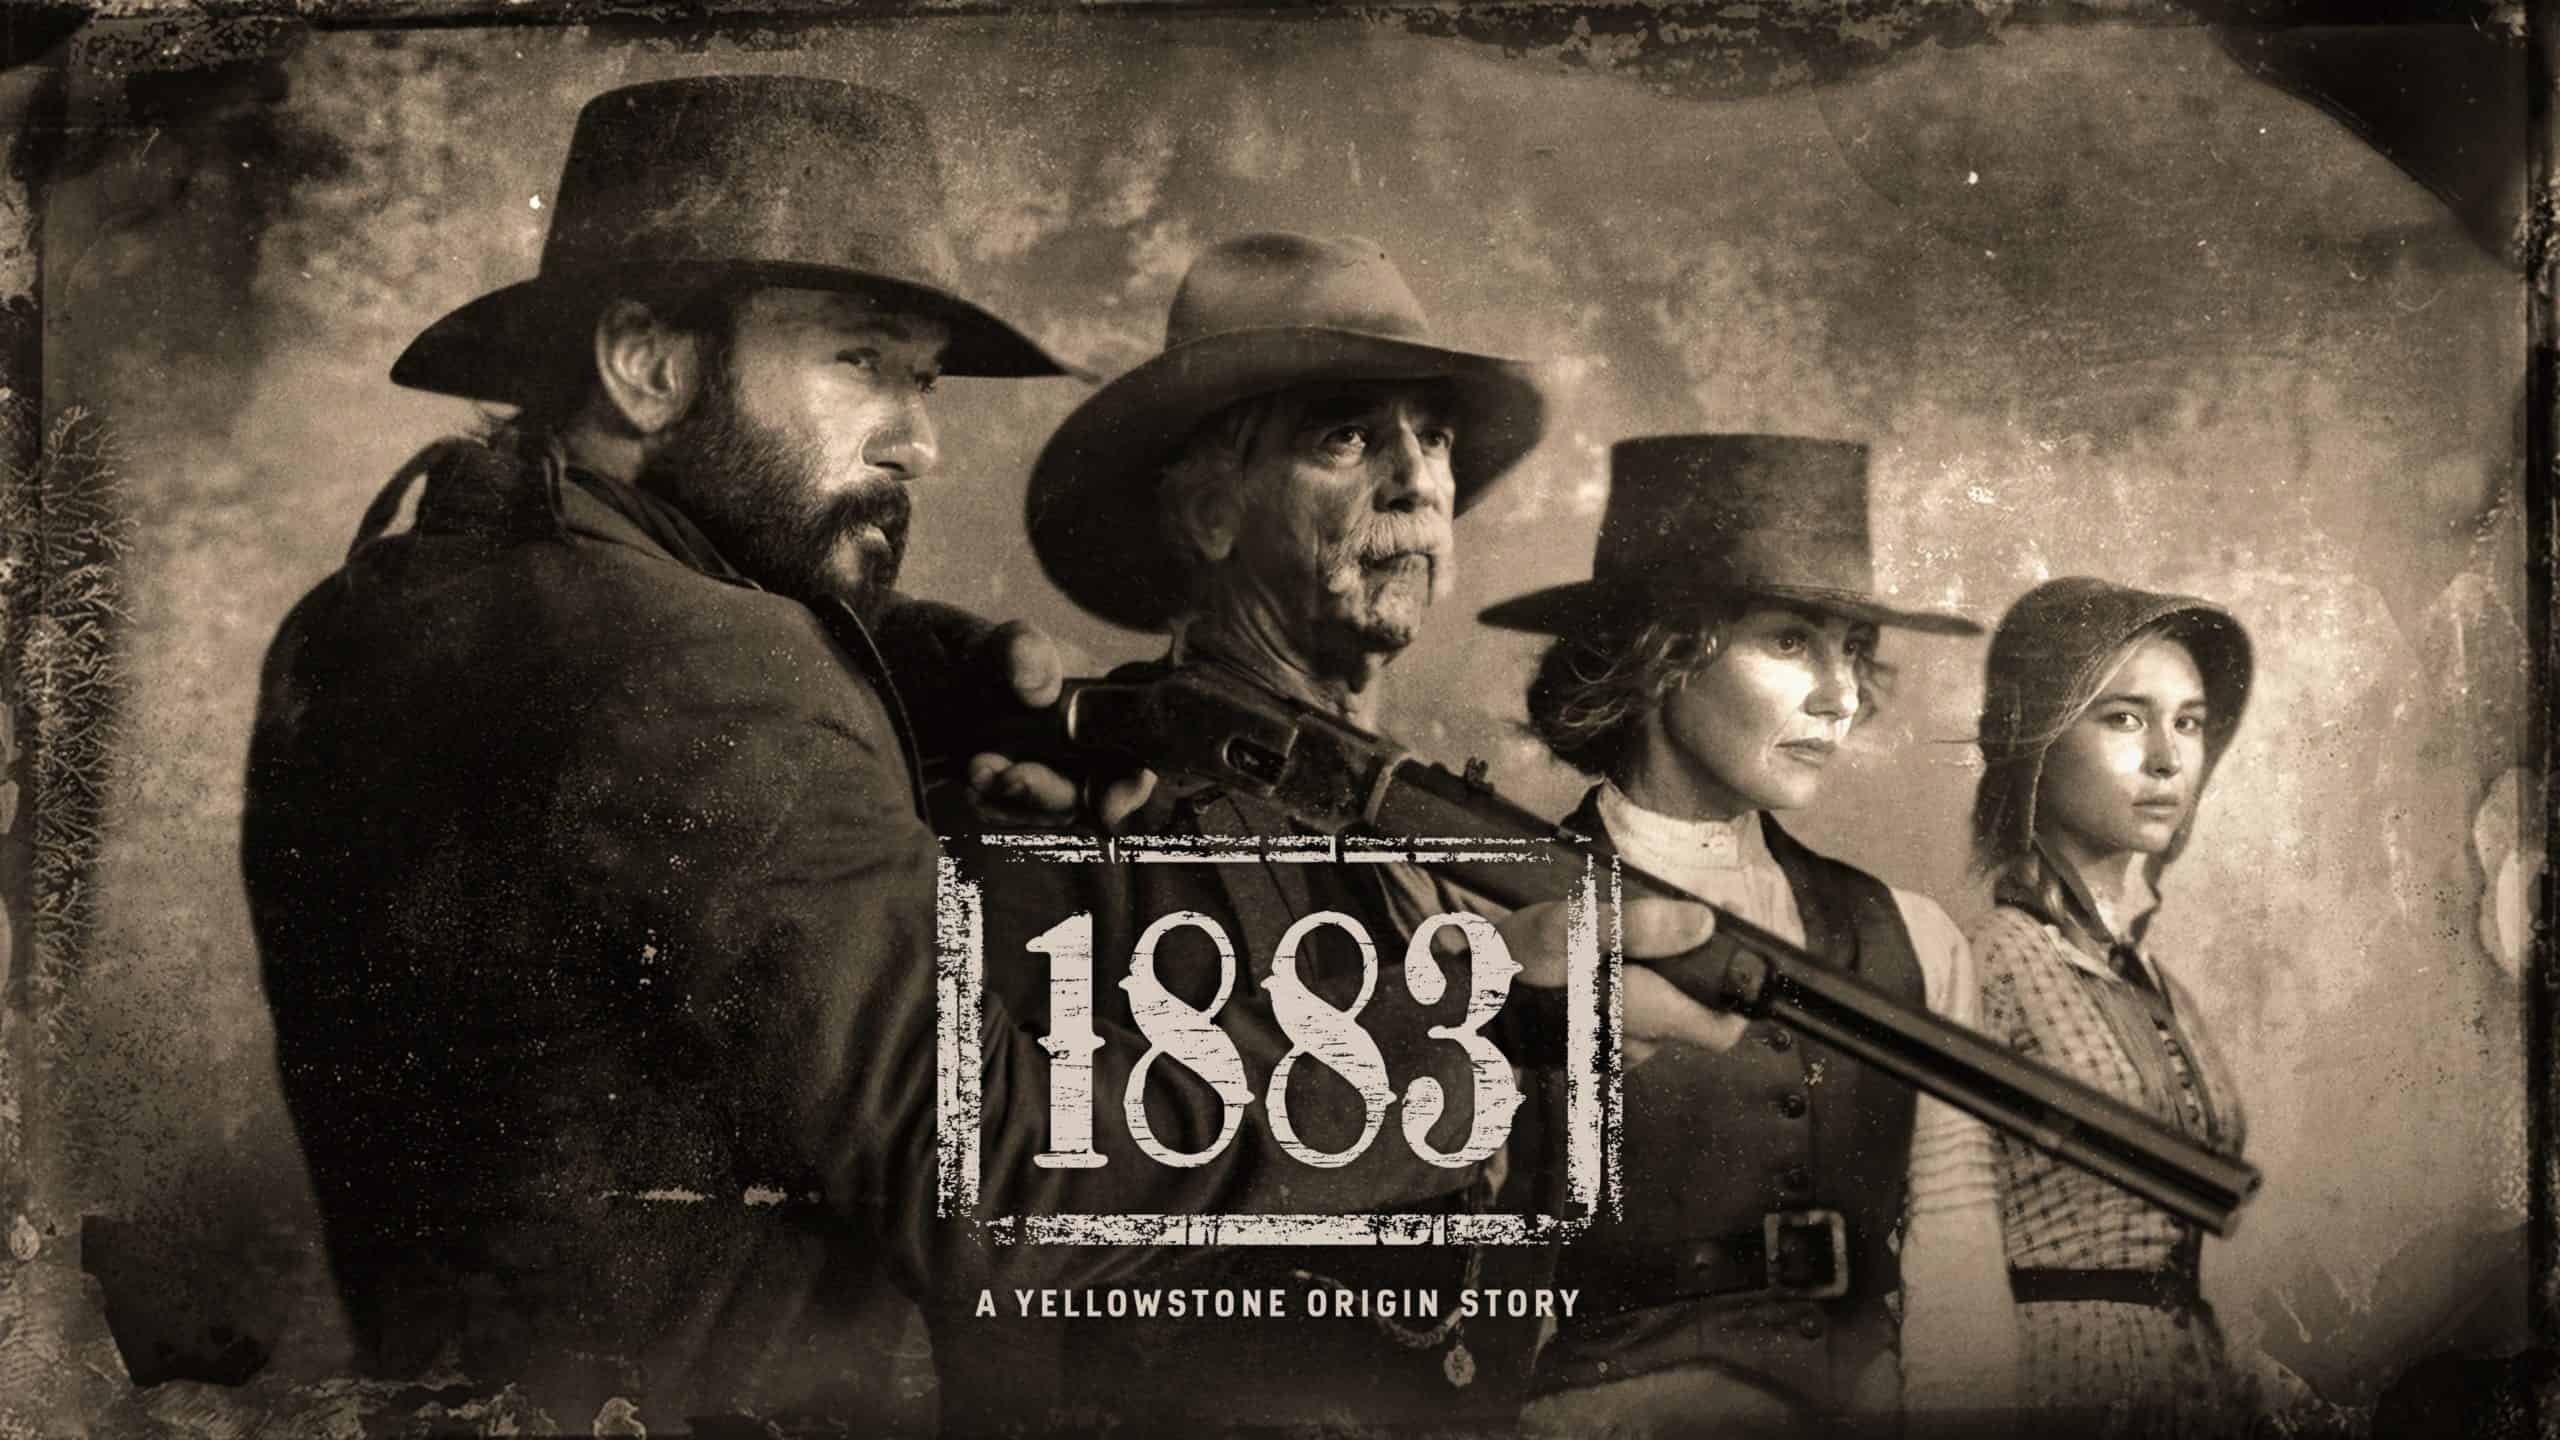 Where Can You Watch “1883”?